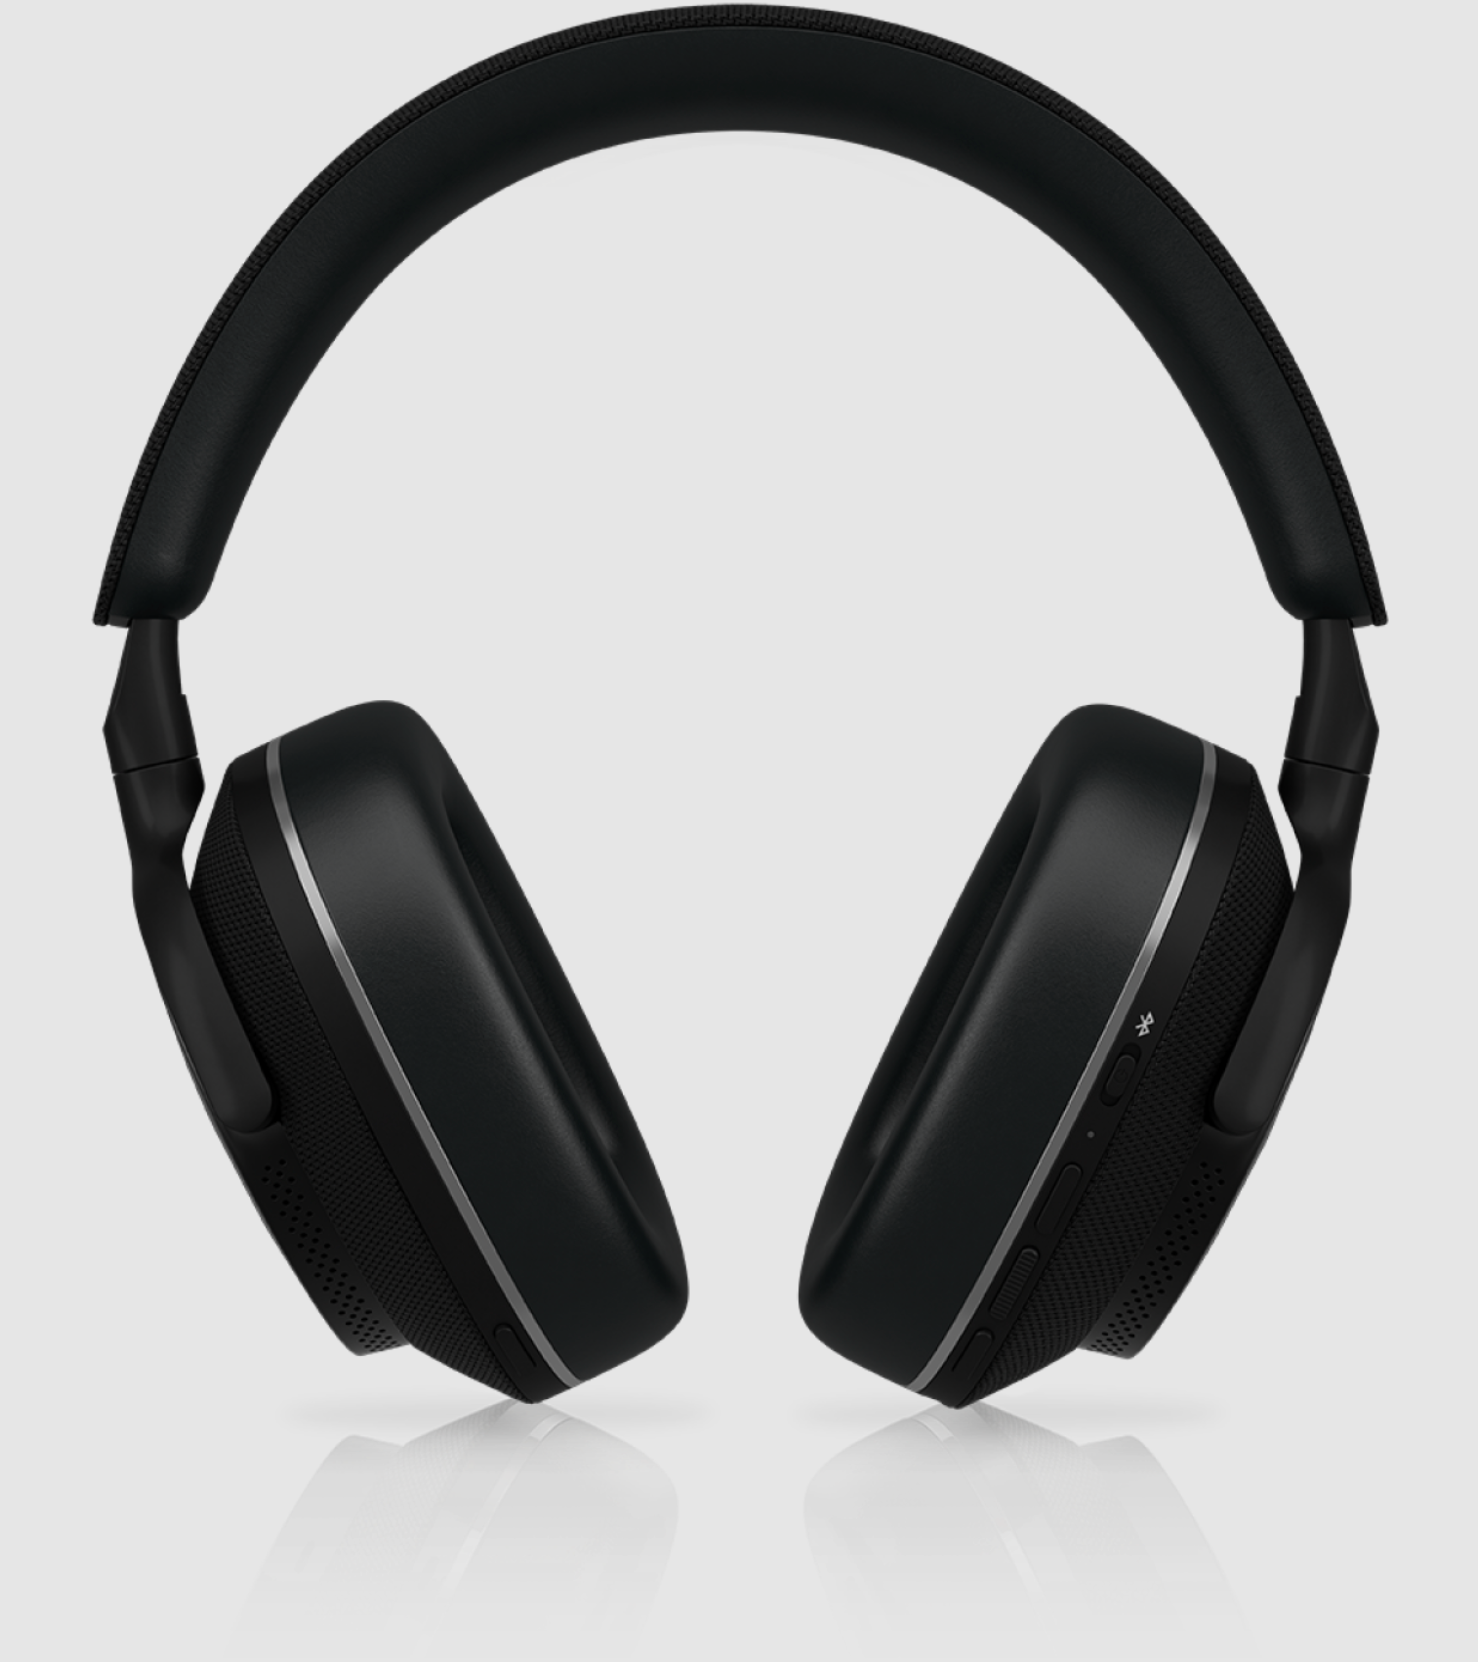 B&W Px7 S2e Noise Cancelling Headphones in Anthracite Black.  Image shows controls